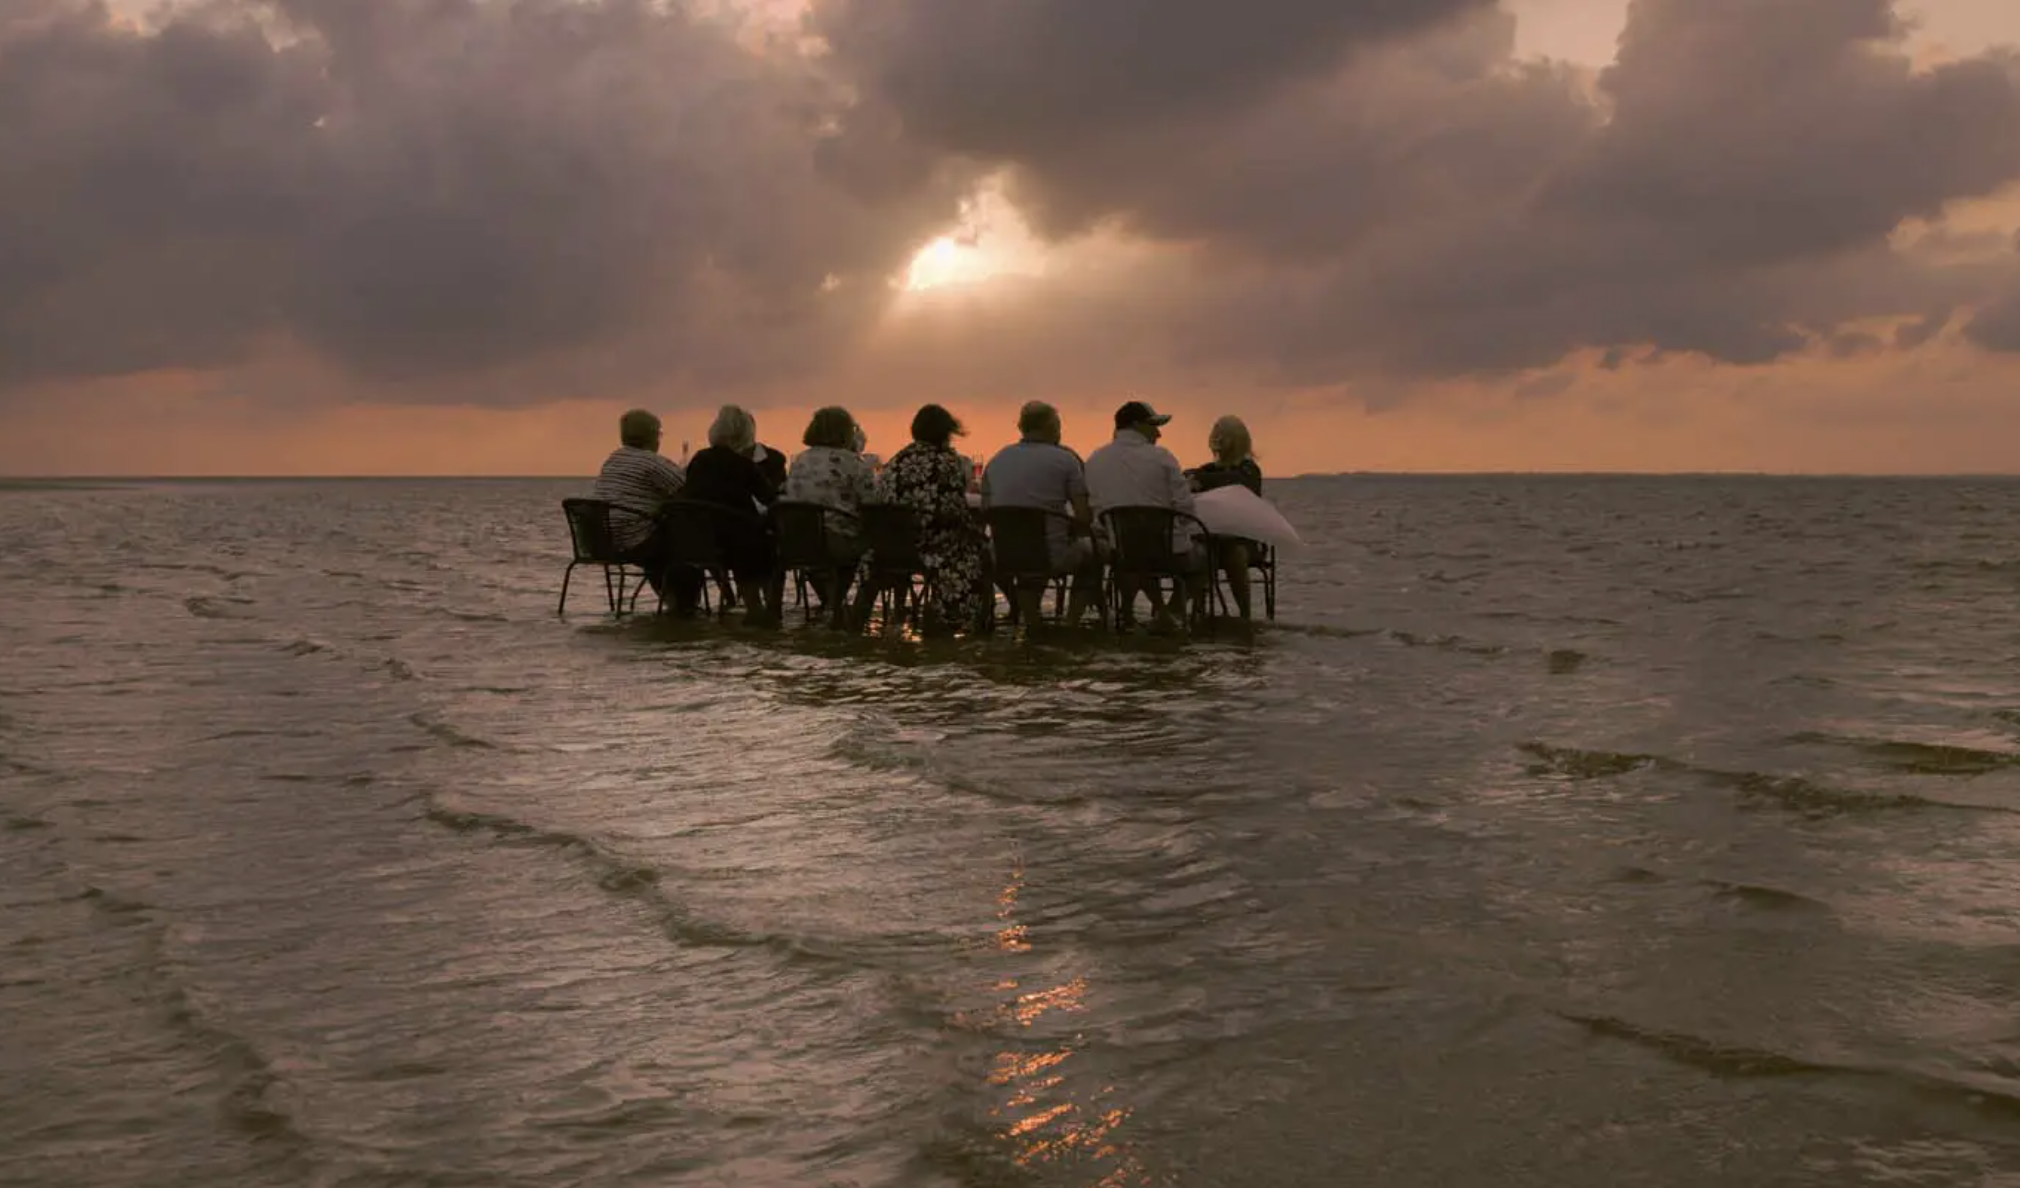 a row of chairs with people sat on them are lined up in the shallow water of a sea with the changing tide, during an orange-glowing sunset sky